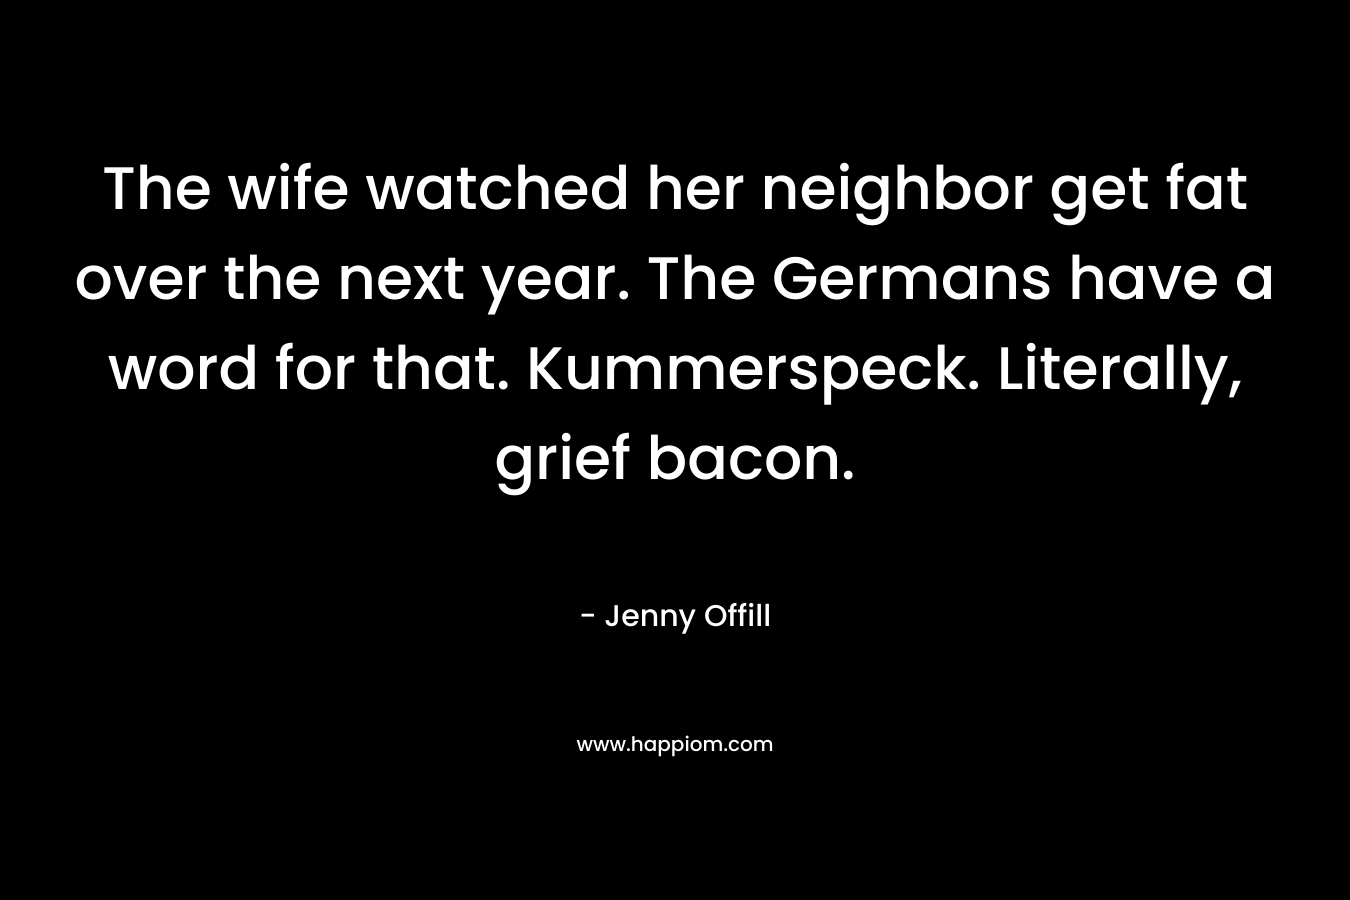 The wife watched her neighbor get fat over the next year. The Germans have a word for that. Kummerspeck. Literally, grief bacon. – Jenny Offill